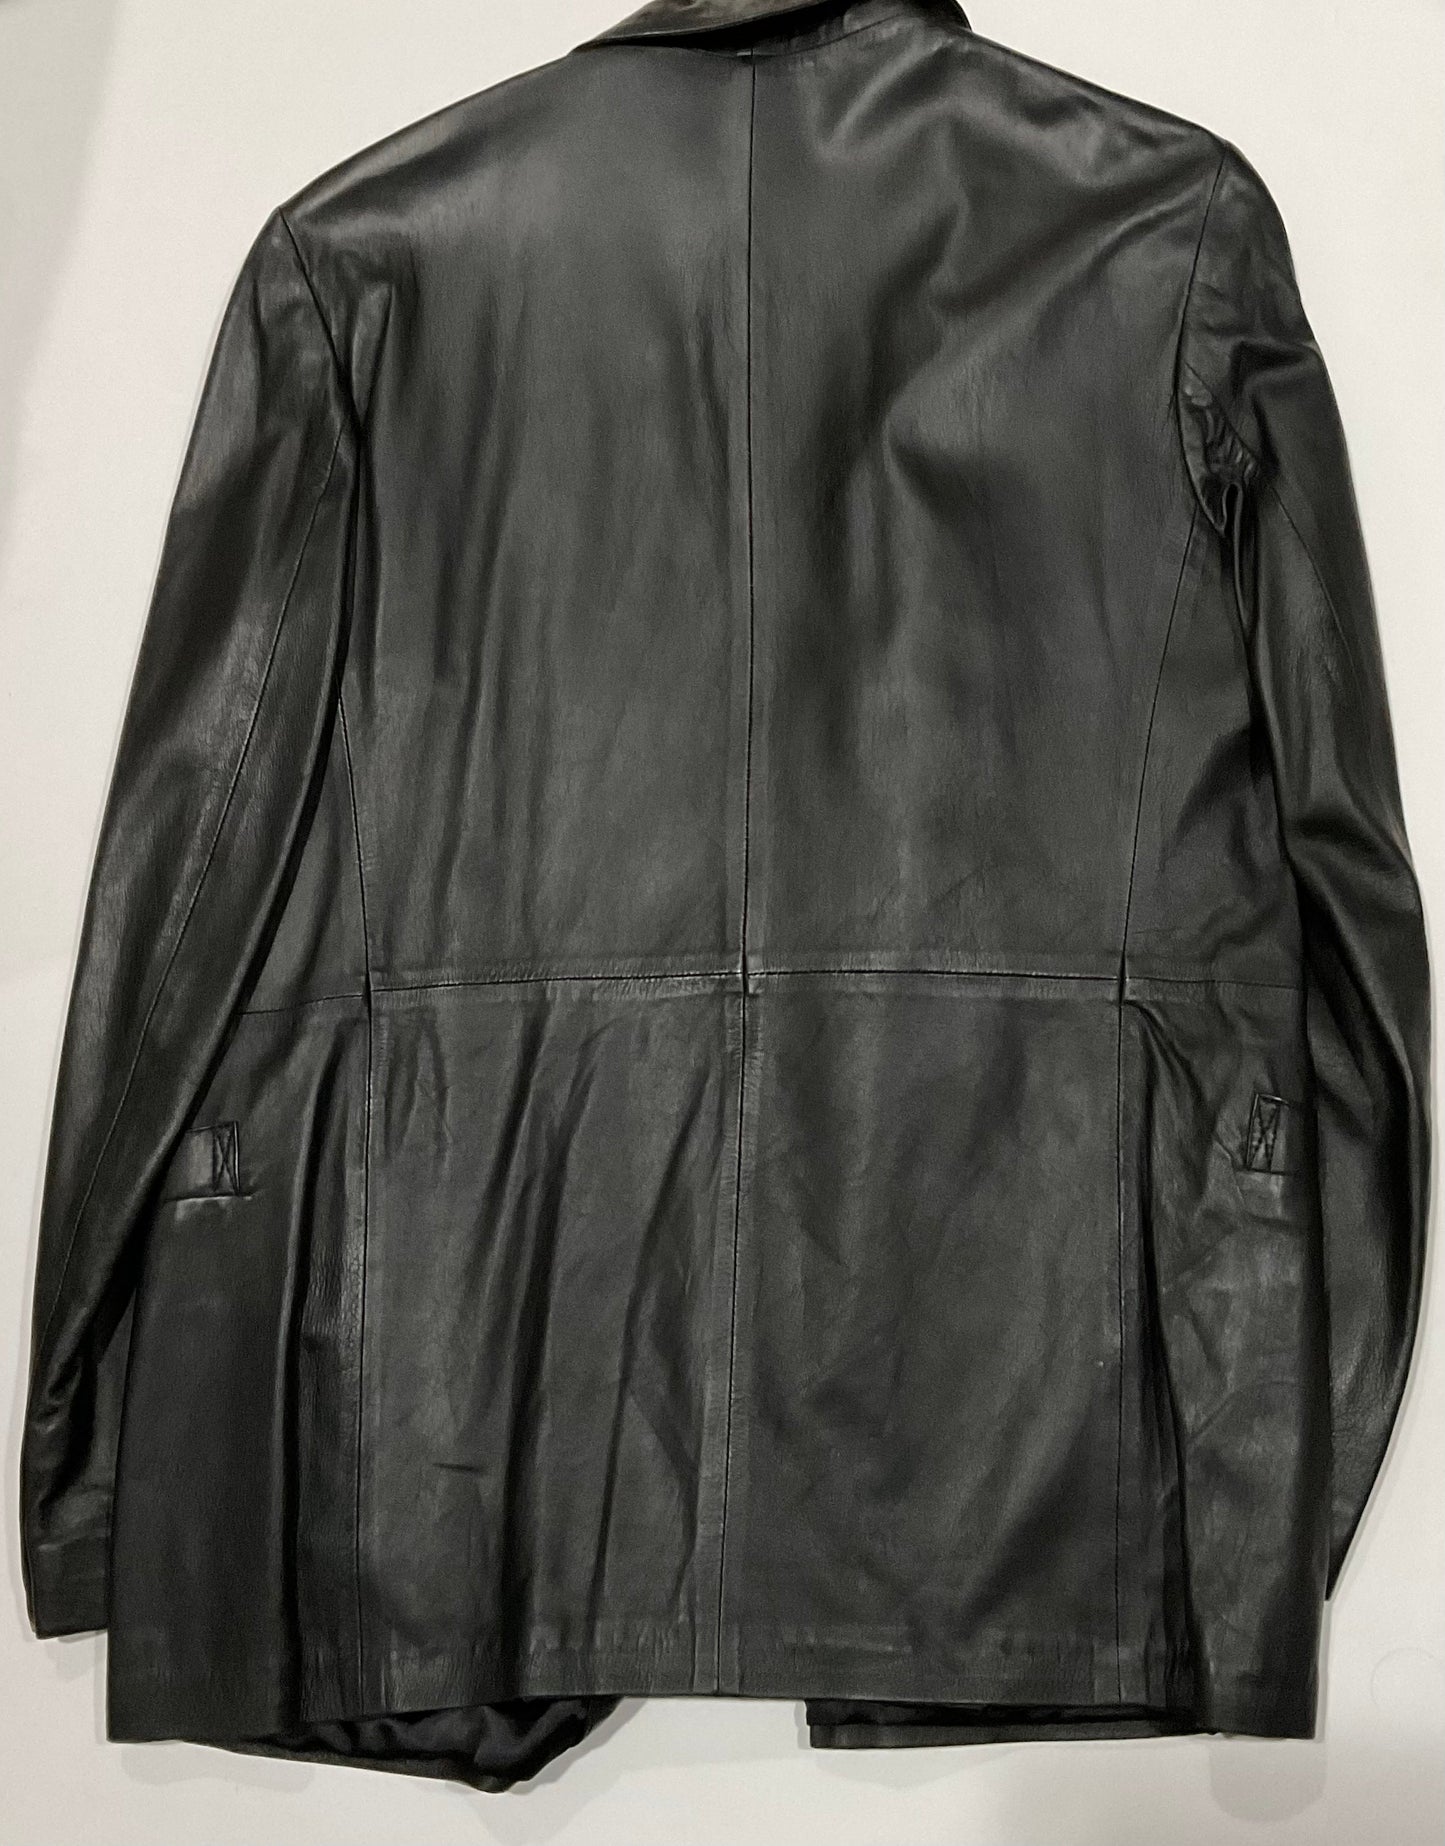 R P LEATHER DOUBLE BREASTED JACKET / BLACK / MEDIUM / MADE IN ITALY